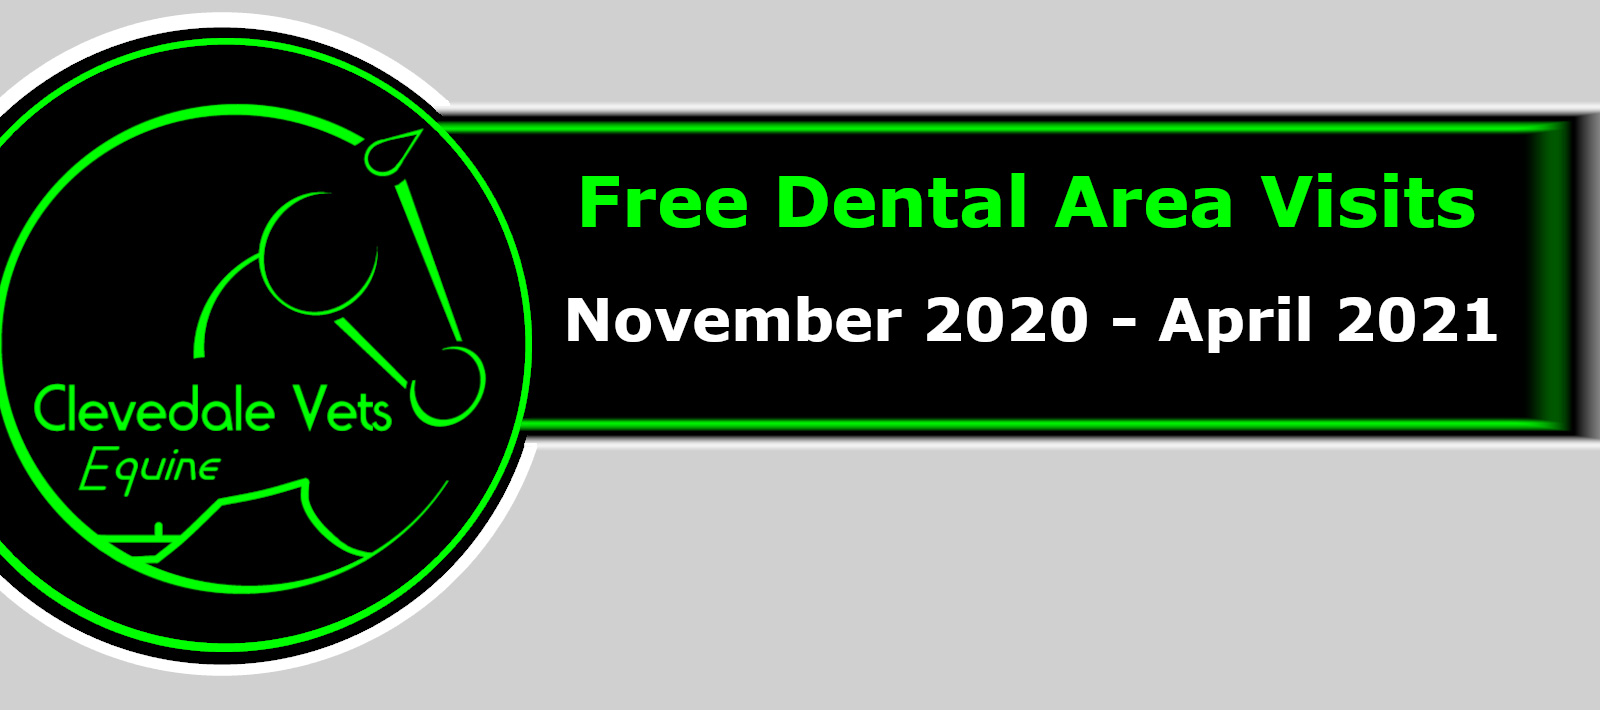 Clevedale Free Dental Area Days